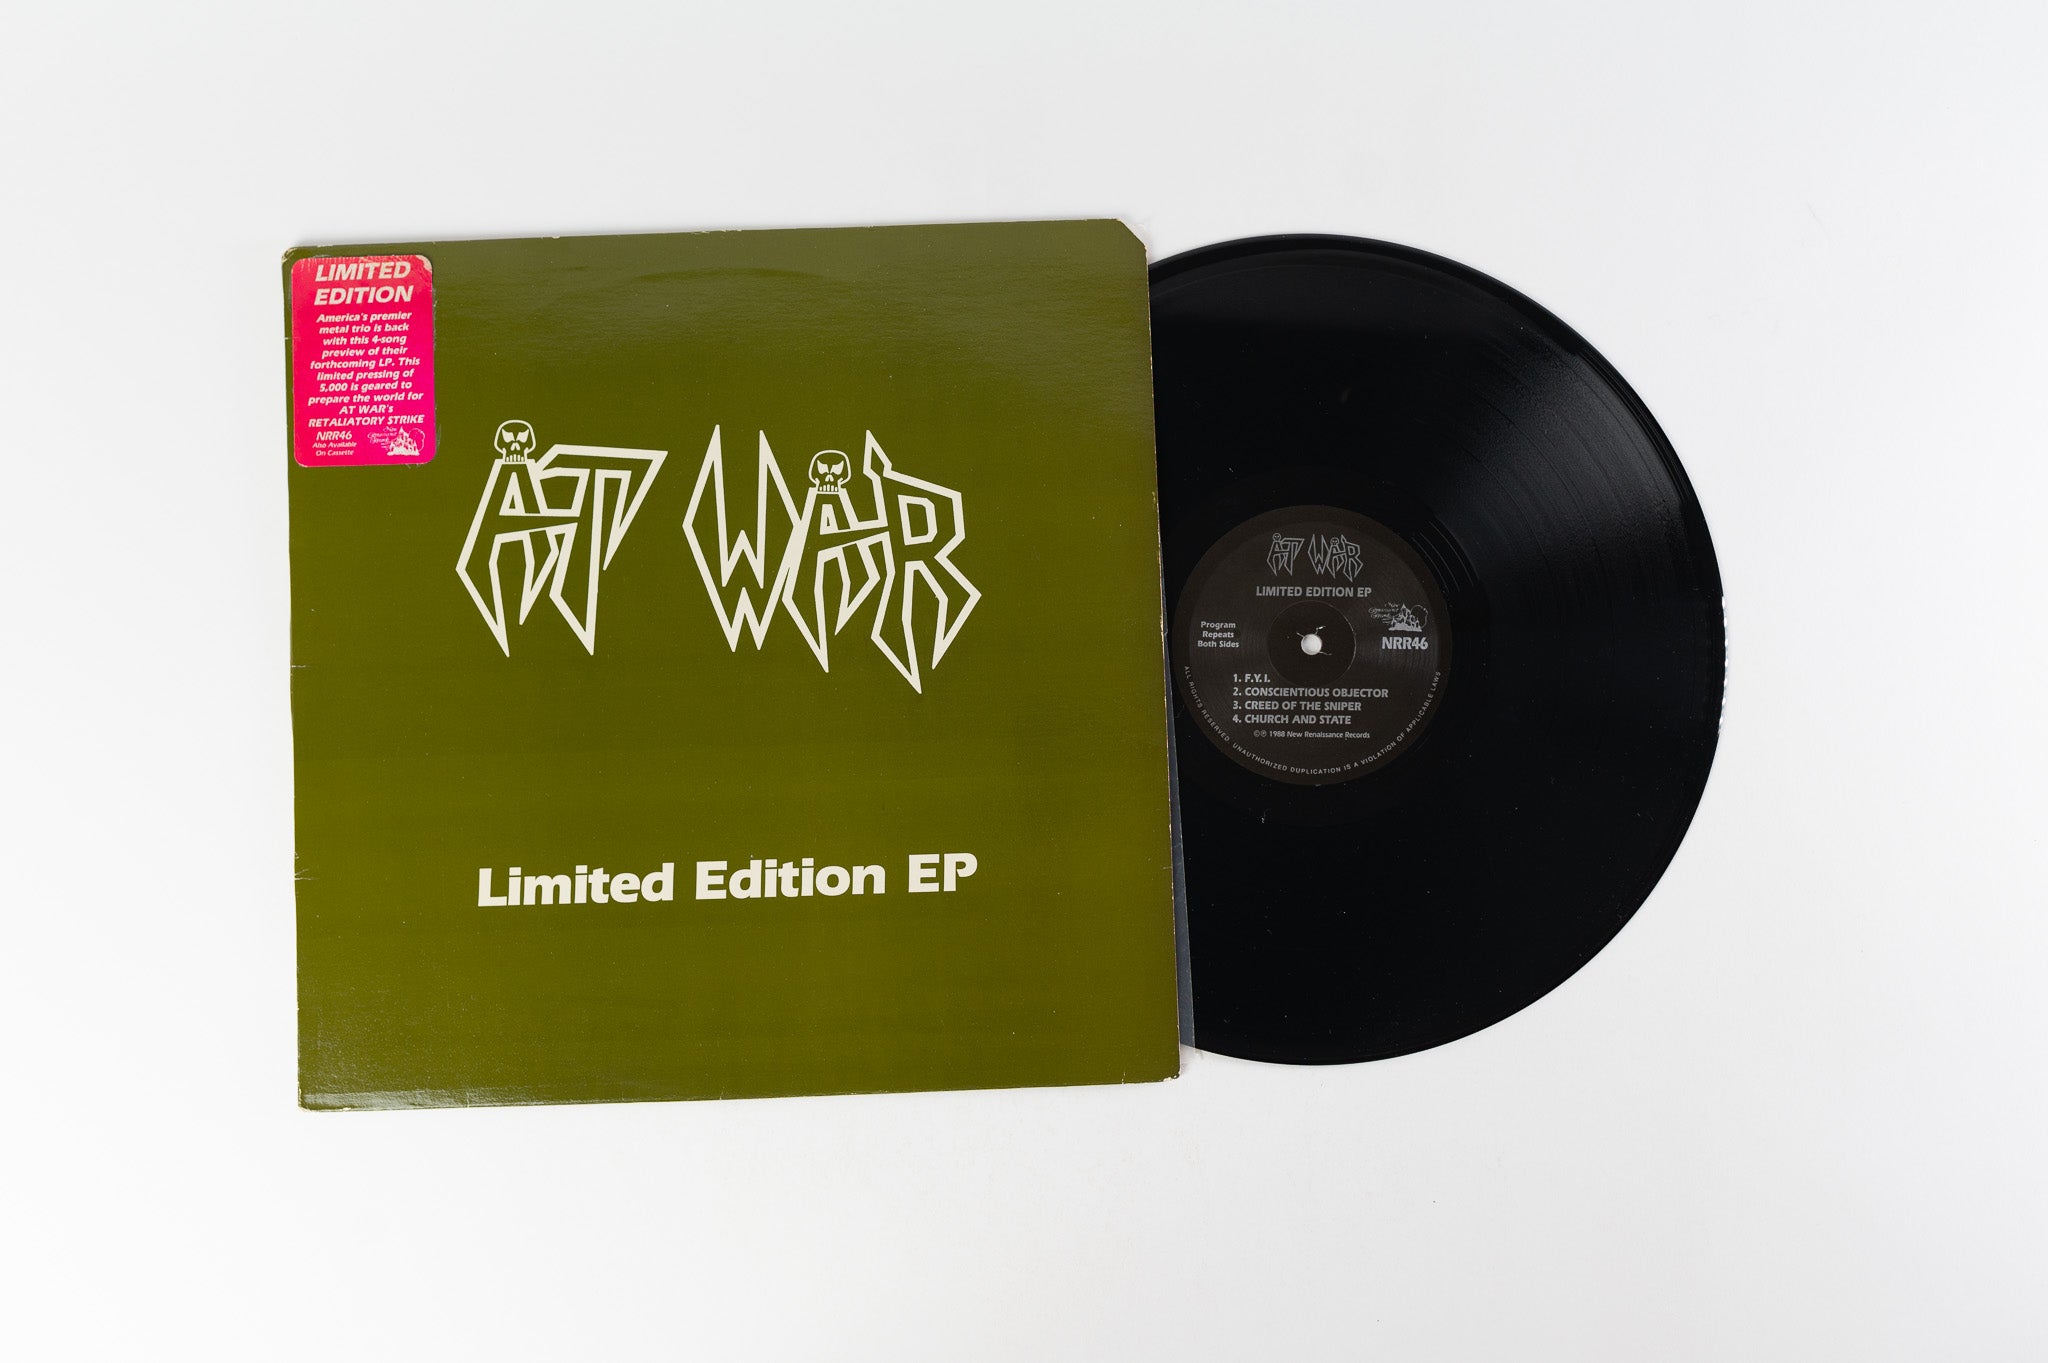 At War - Limited Edition EP on New Renaissance